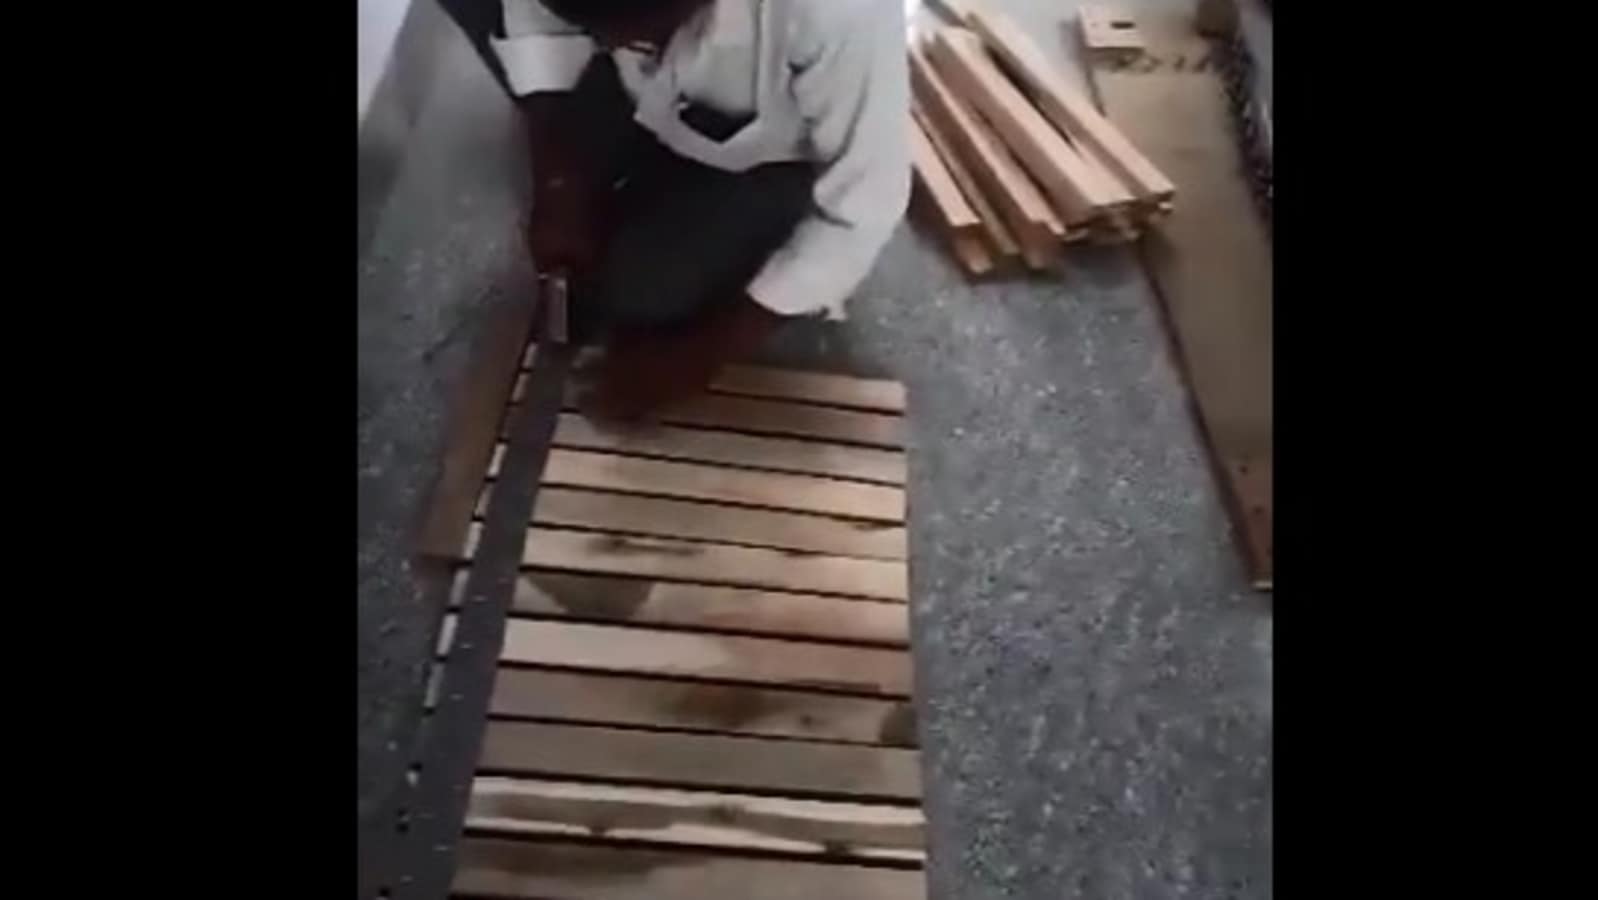 Man’s makes wooden treadmill that works. Video wows KTR and Anand Mahindra